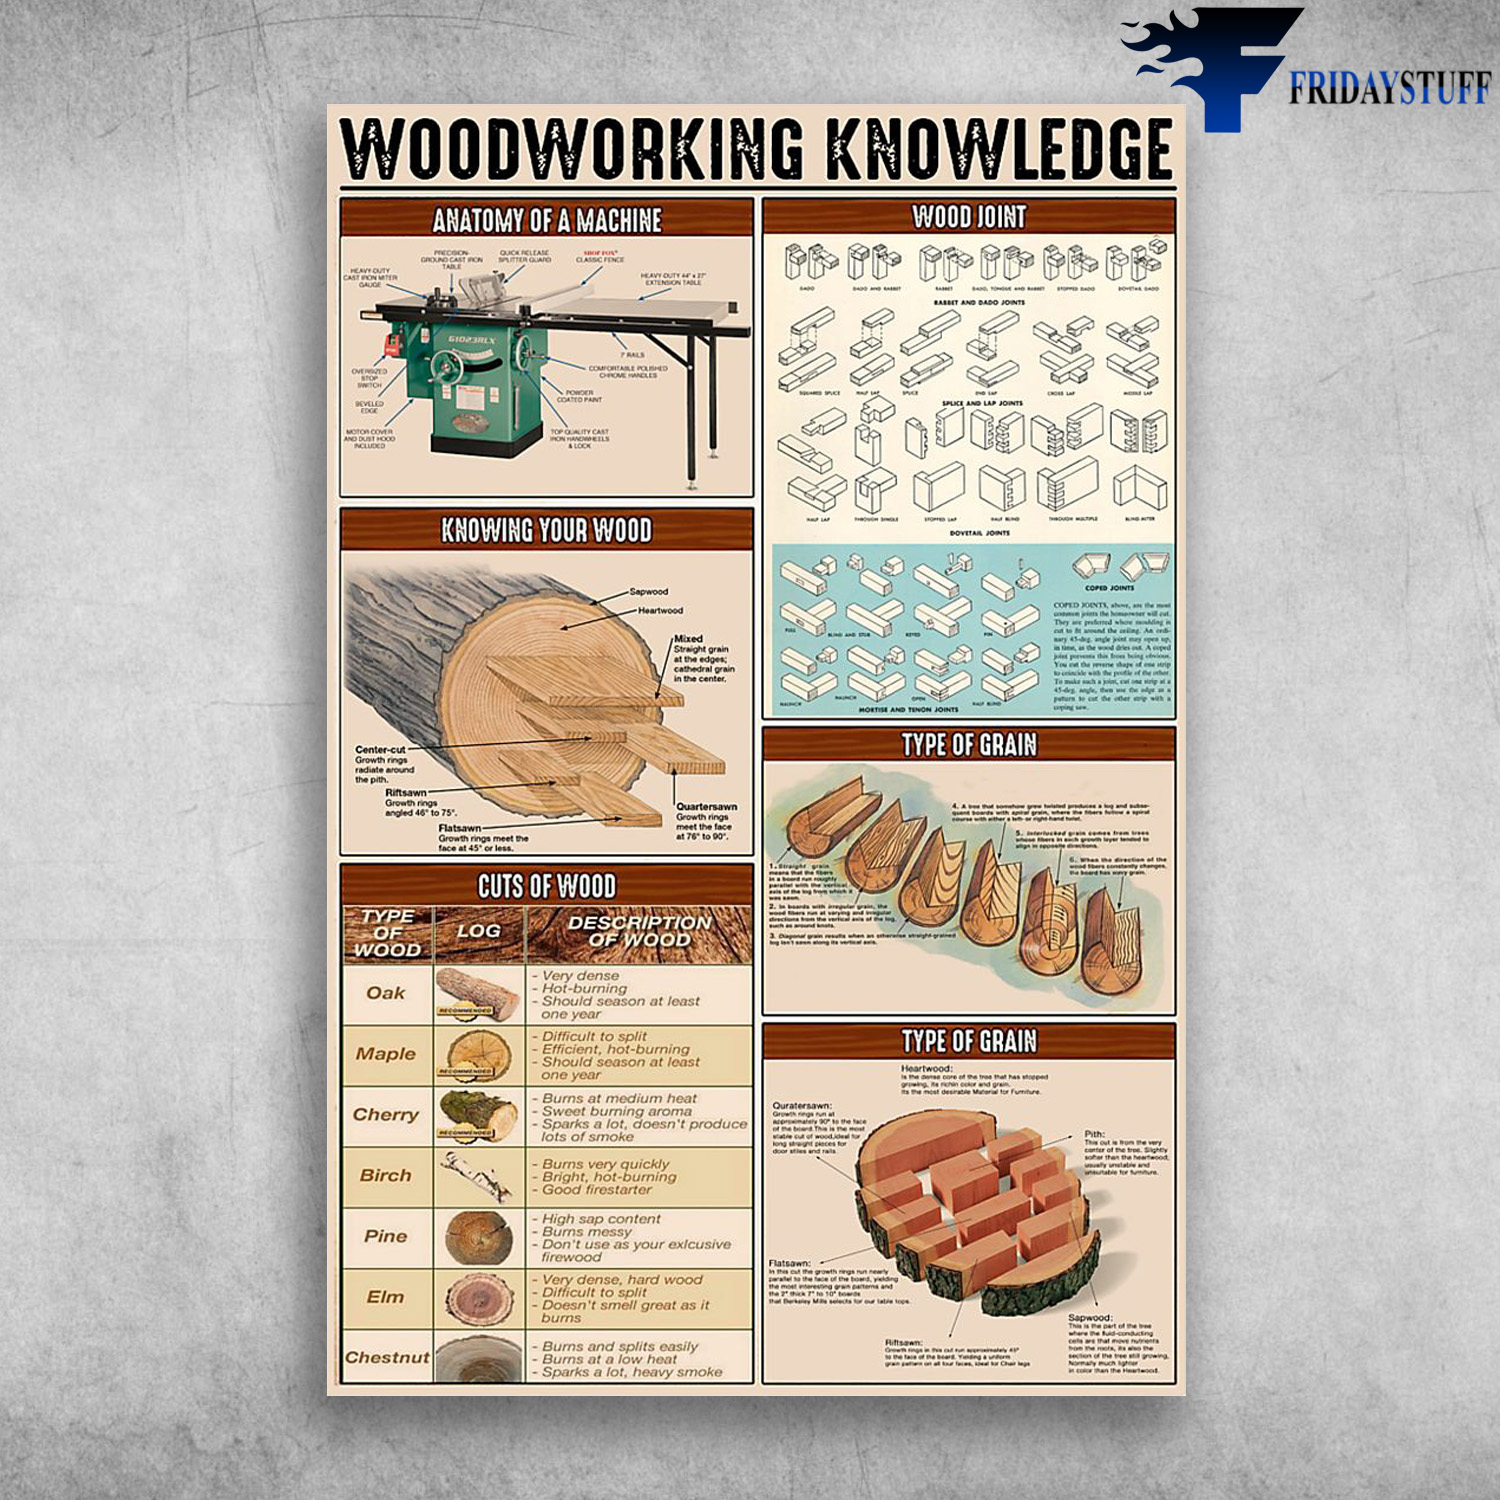 The Knowledge Of Woodworking